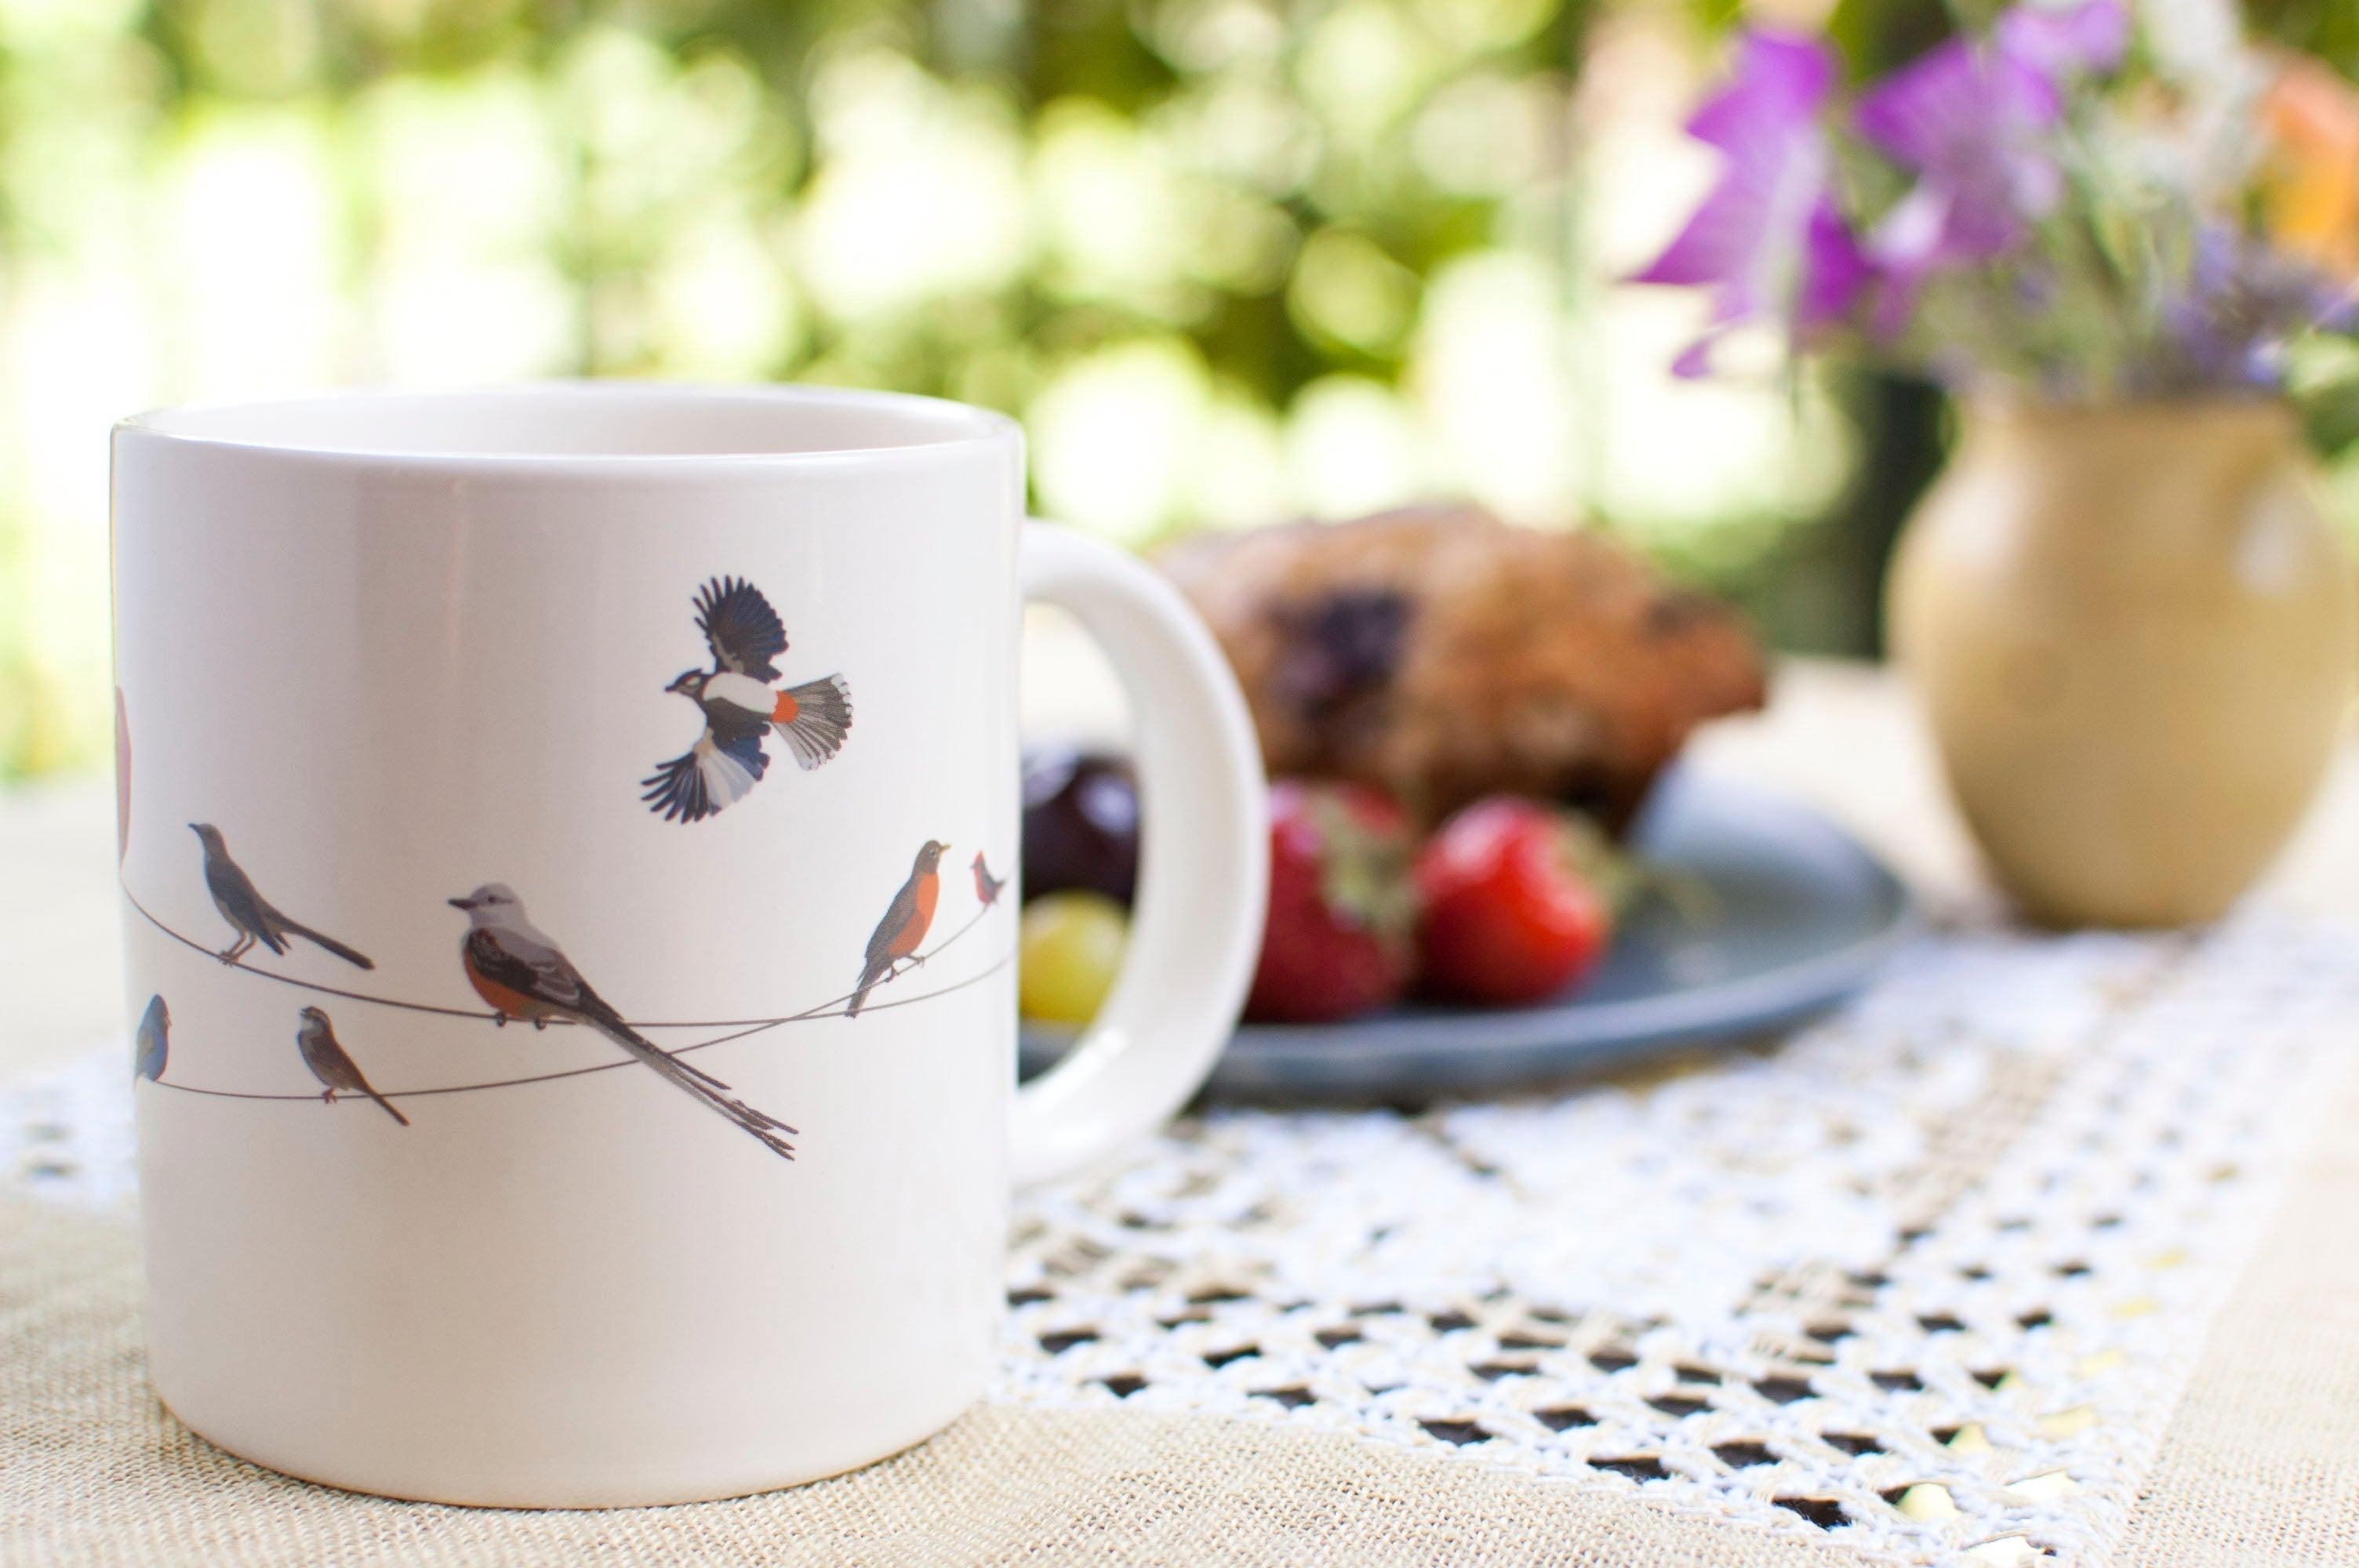 Product photo of Birds on a Wire Heat-Changing Mug, a novelty gift manufactured by The Unemployed Philosophers Guild.